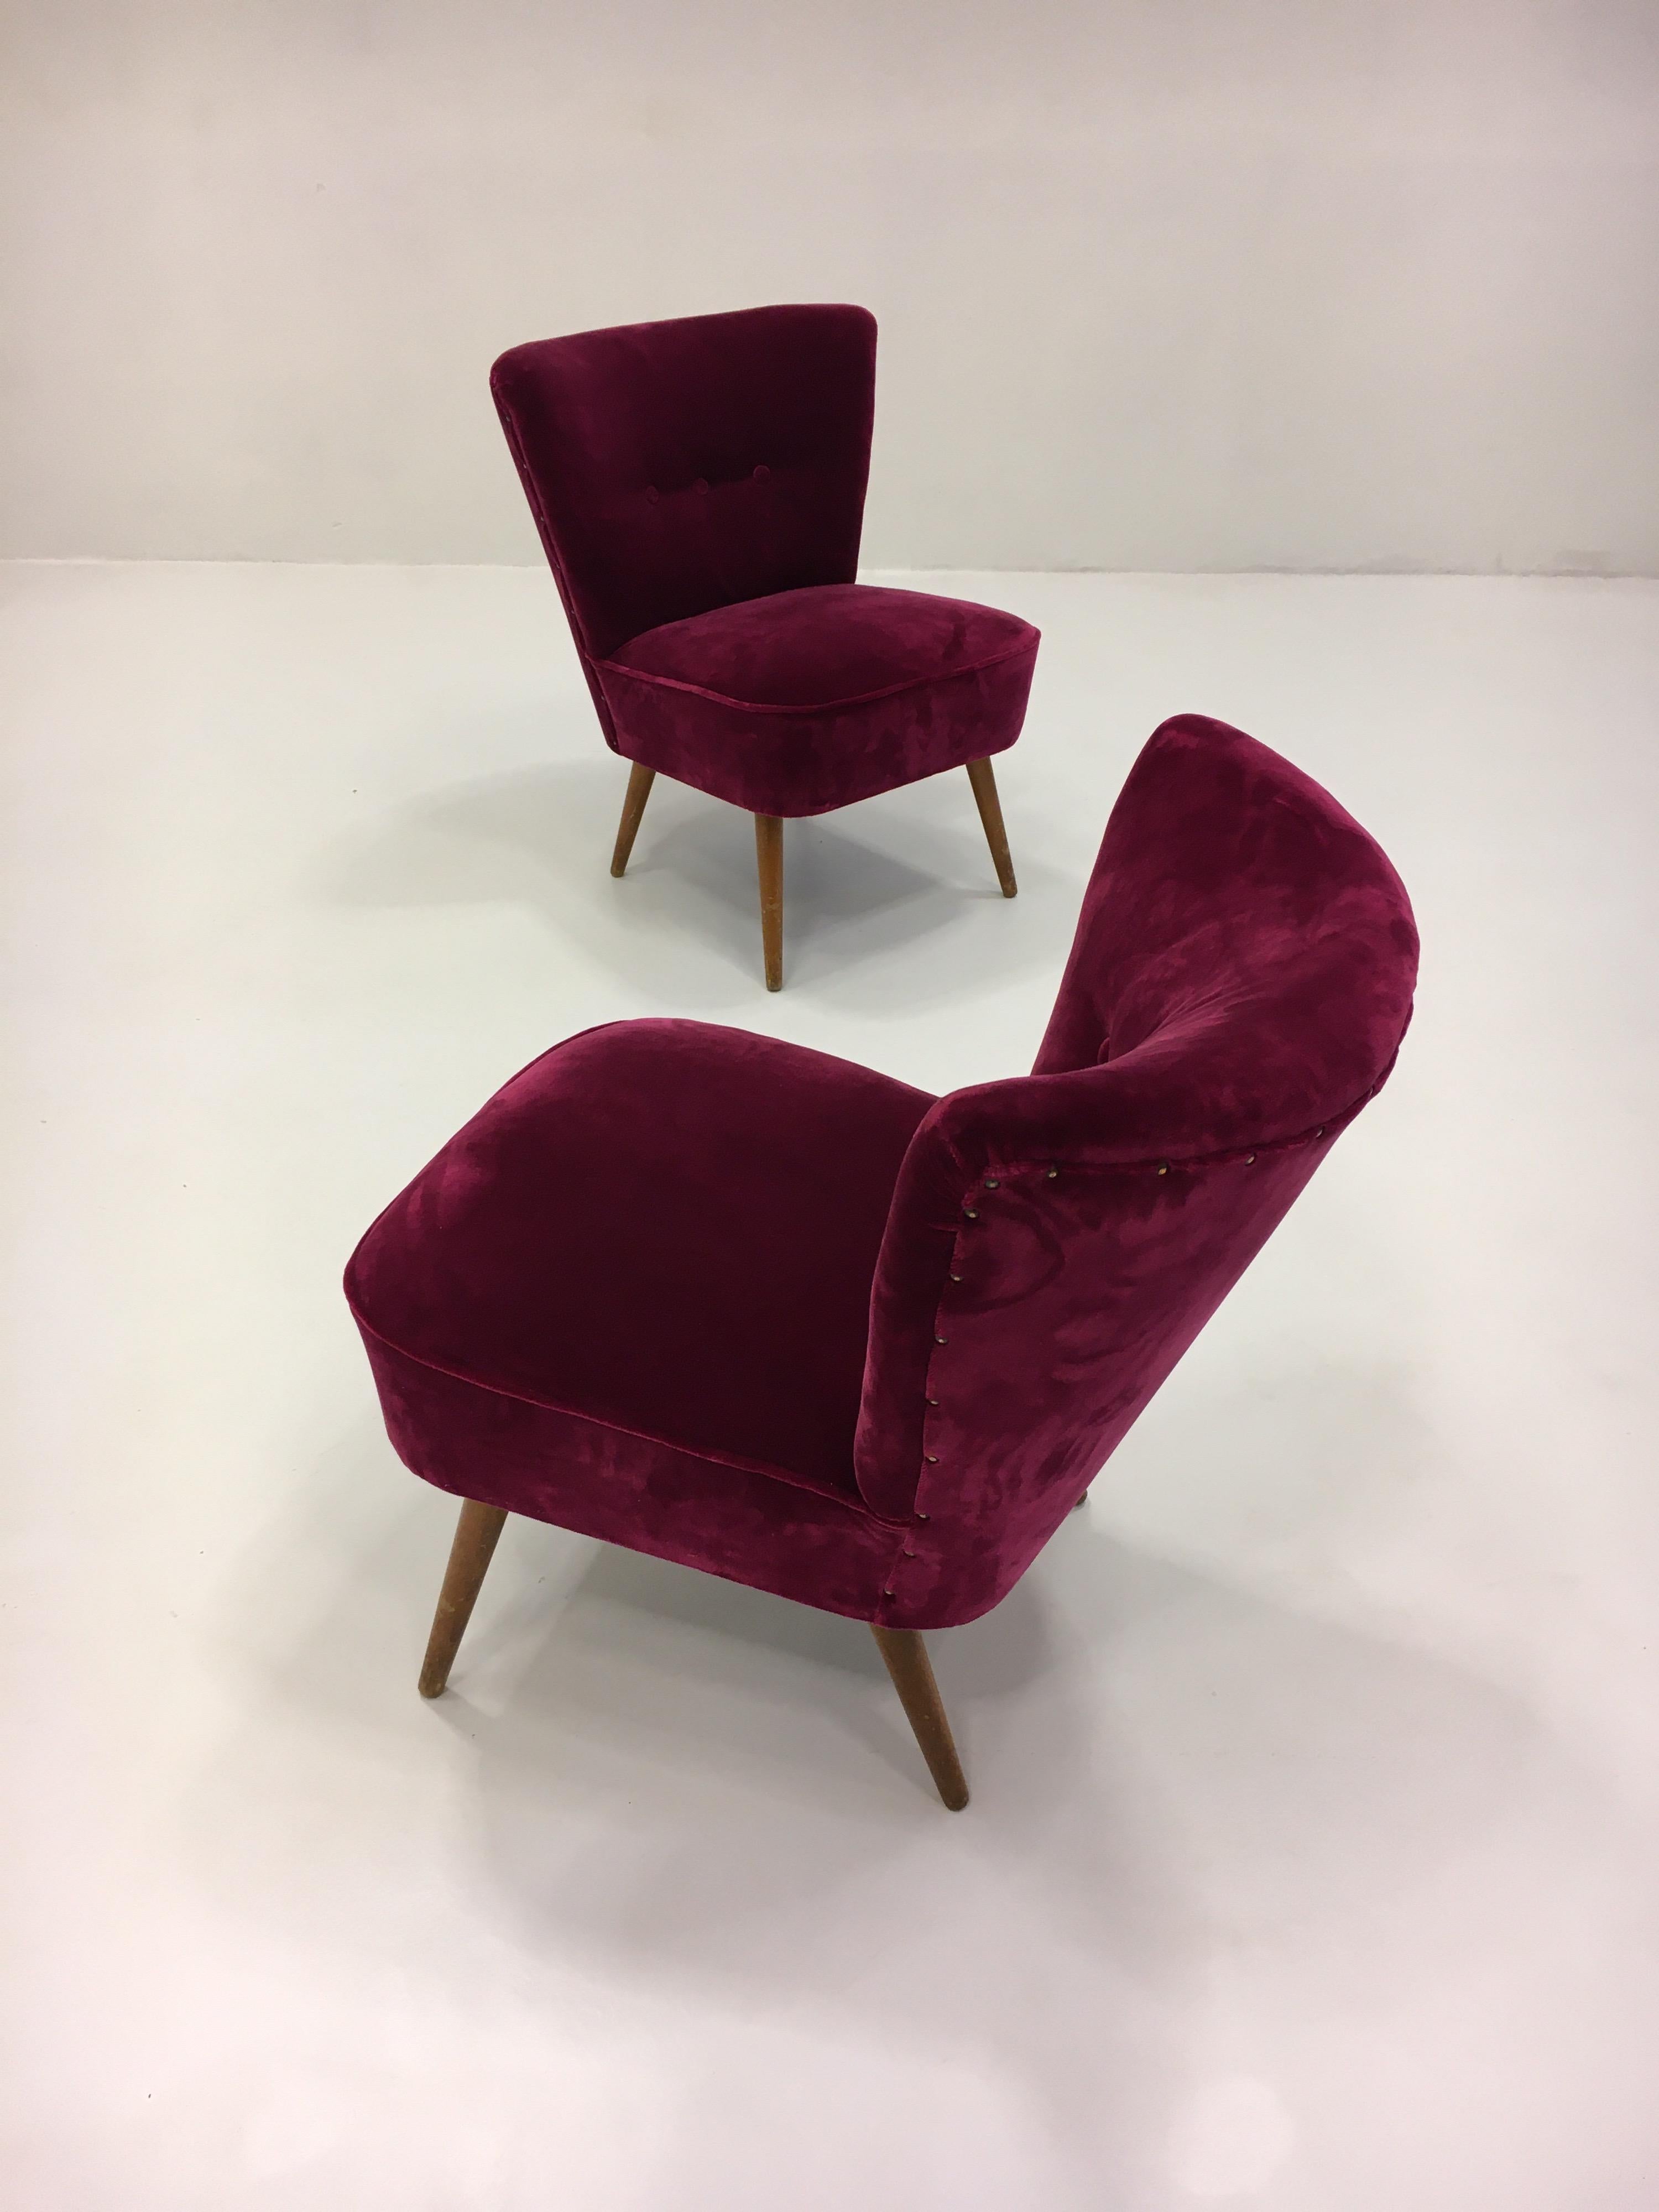 French Mid-Century Modern Cocktail Chairs, France, 1950s For Sale